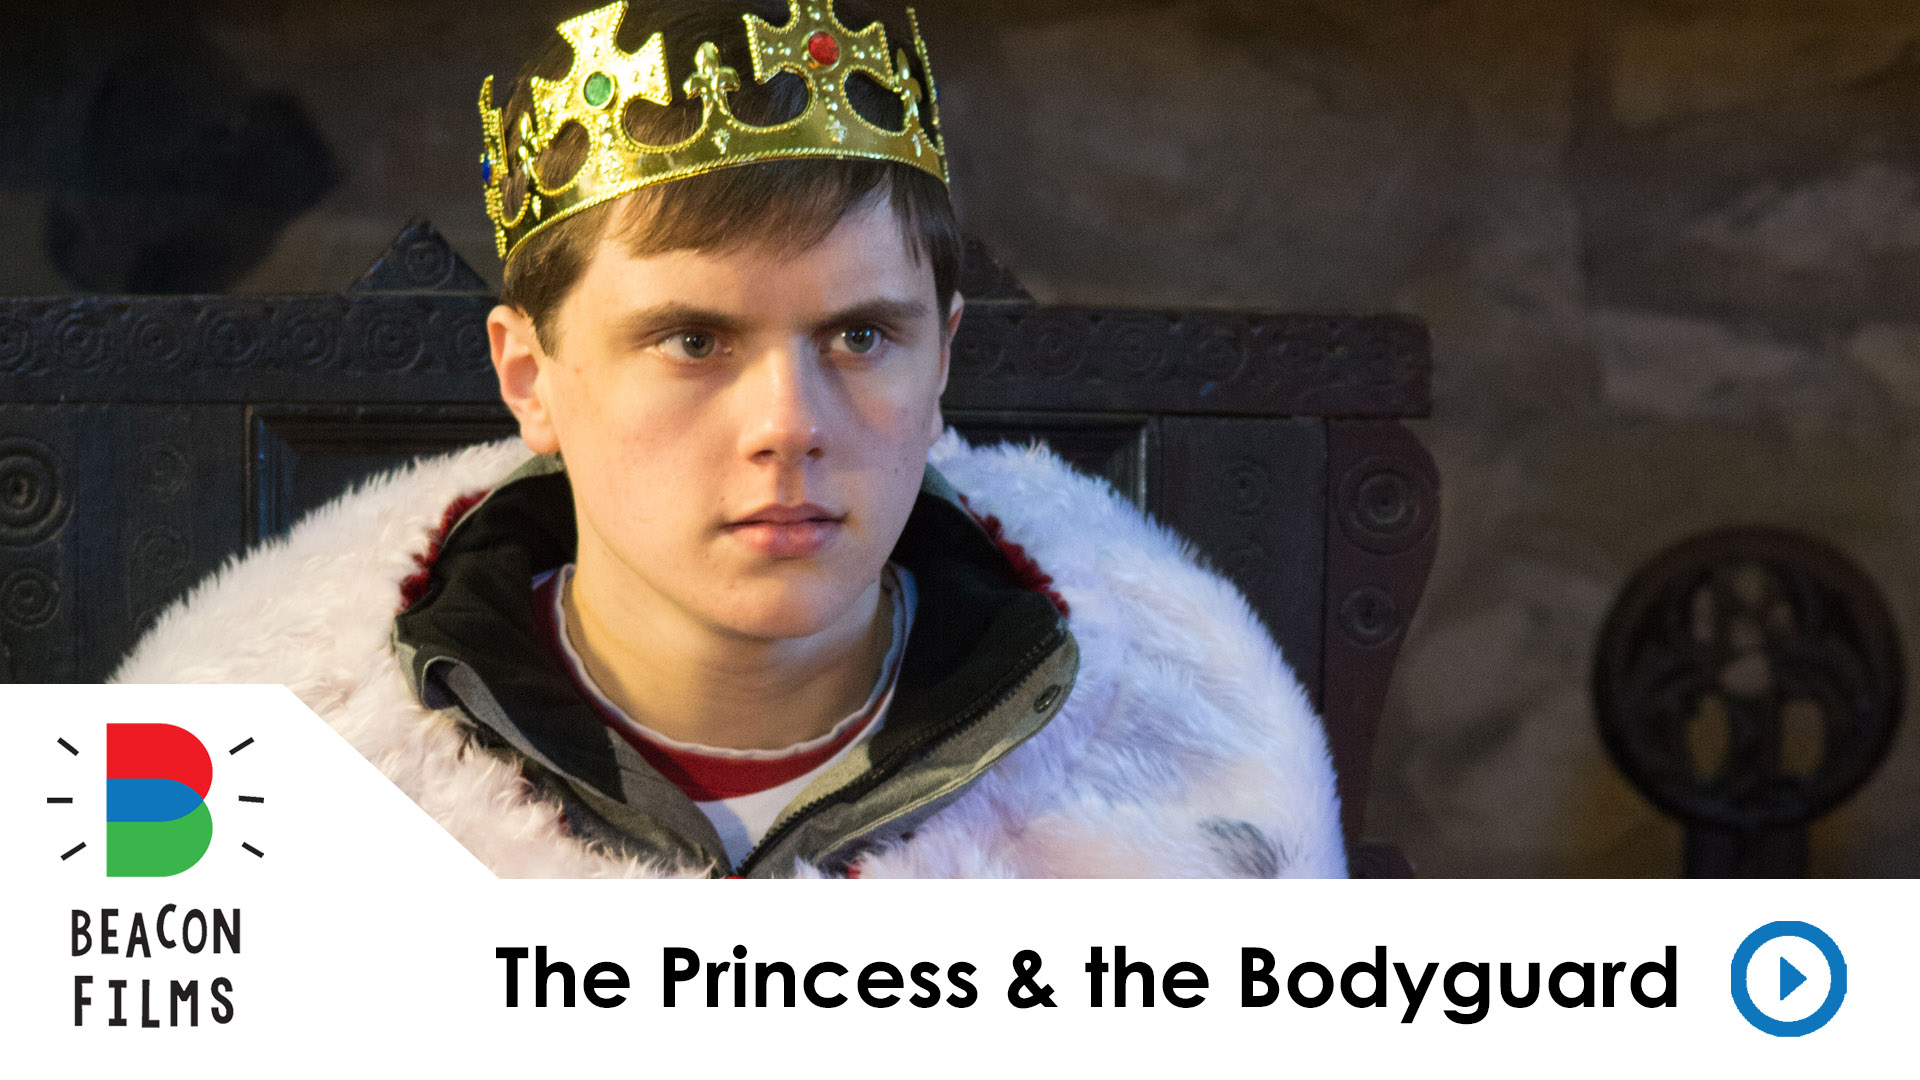 The Princess and the Bodyguard streaming online